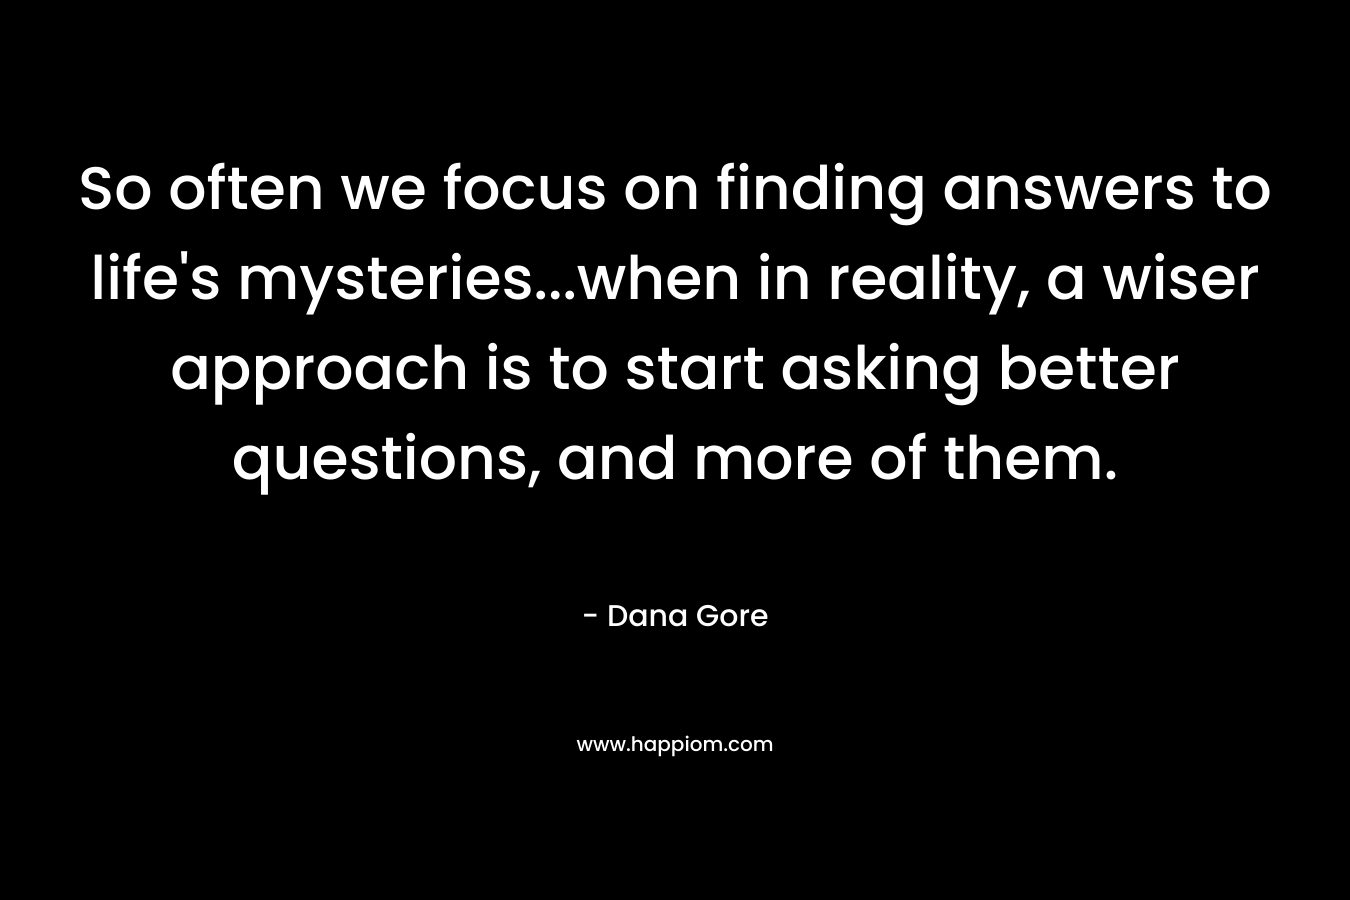 So often we focus on finding answers to life’s mysteries…when in reality, a wiser approach is to start asking better questions, and more of them. – Dana Gore